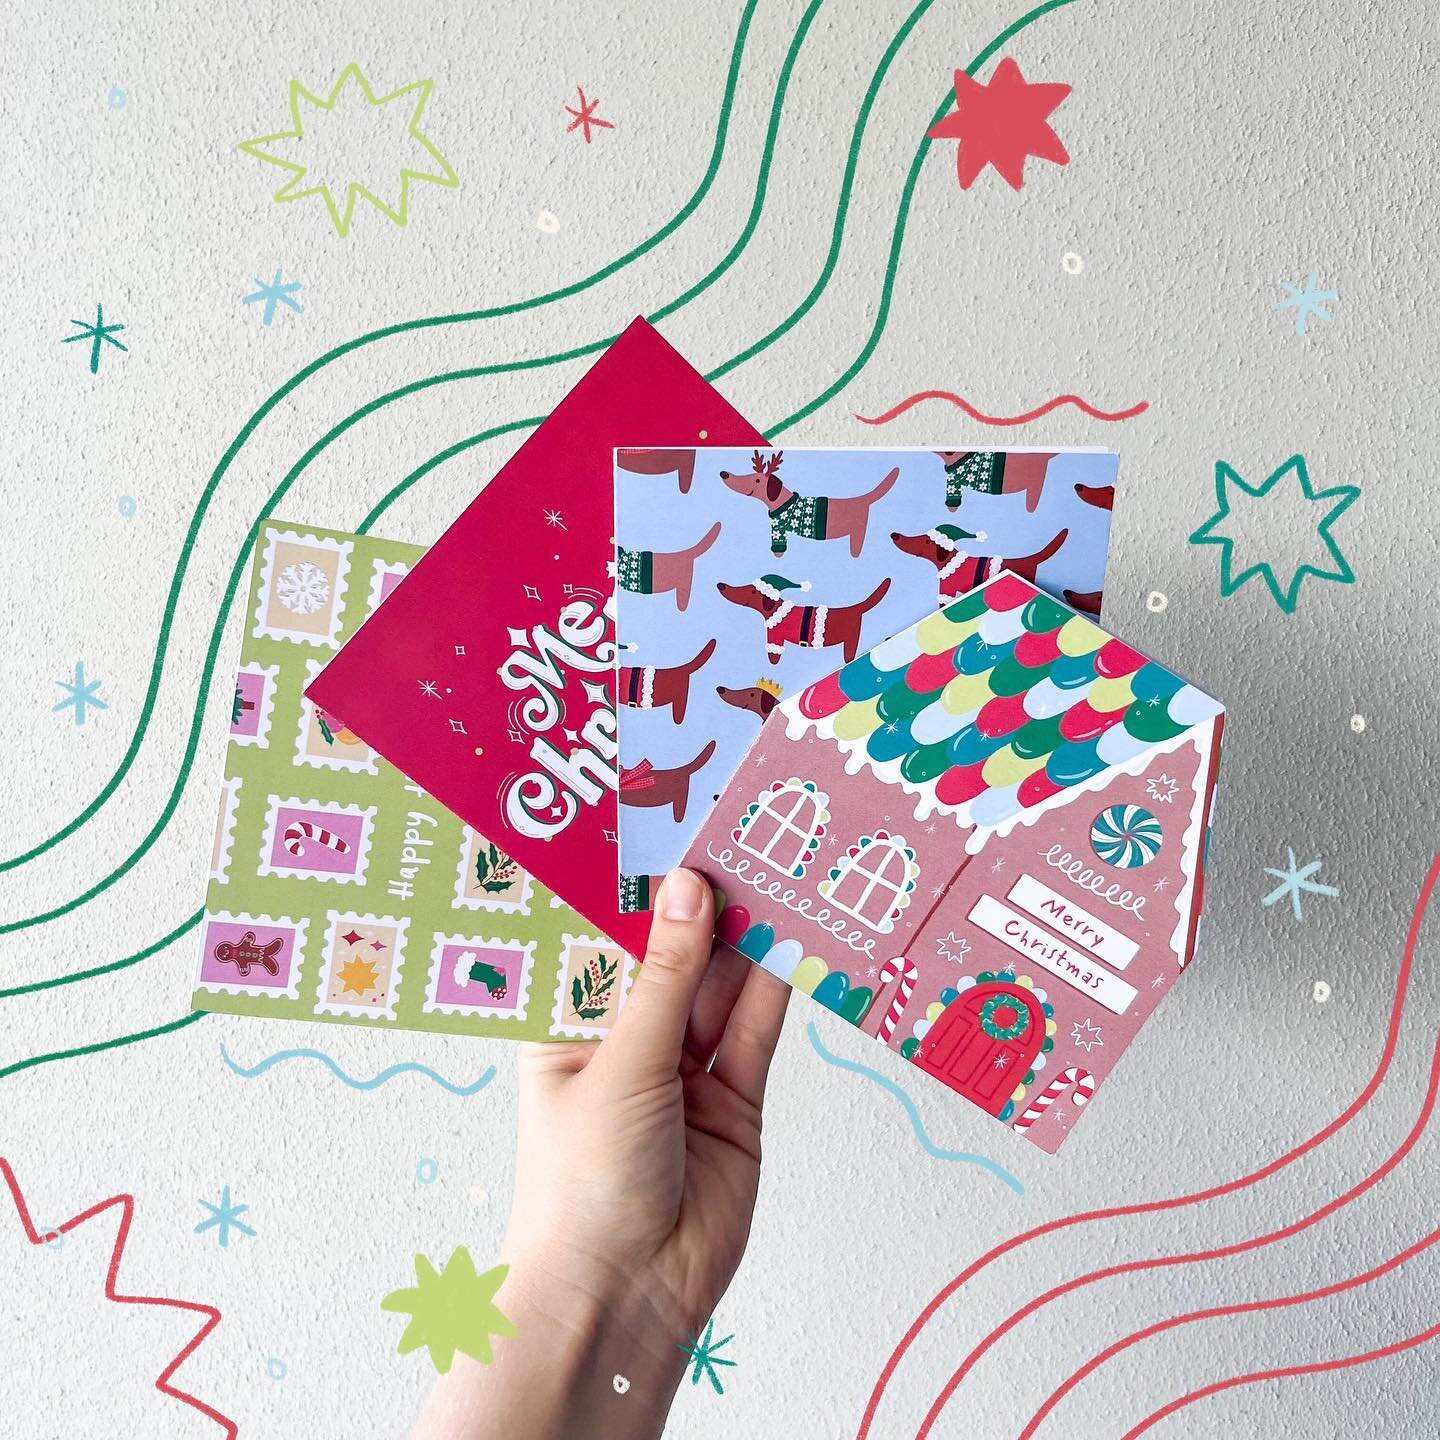 ho ho ho christmas cards are here!! ✨🎄
I&rsquo;ve got four designs and this year I won&rsquo;t be selling them on my Etsy, I&rsquo;ll only be selling them in person but I&rsquo;m more than happy to arrange shipment if you would really like some, jus